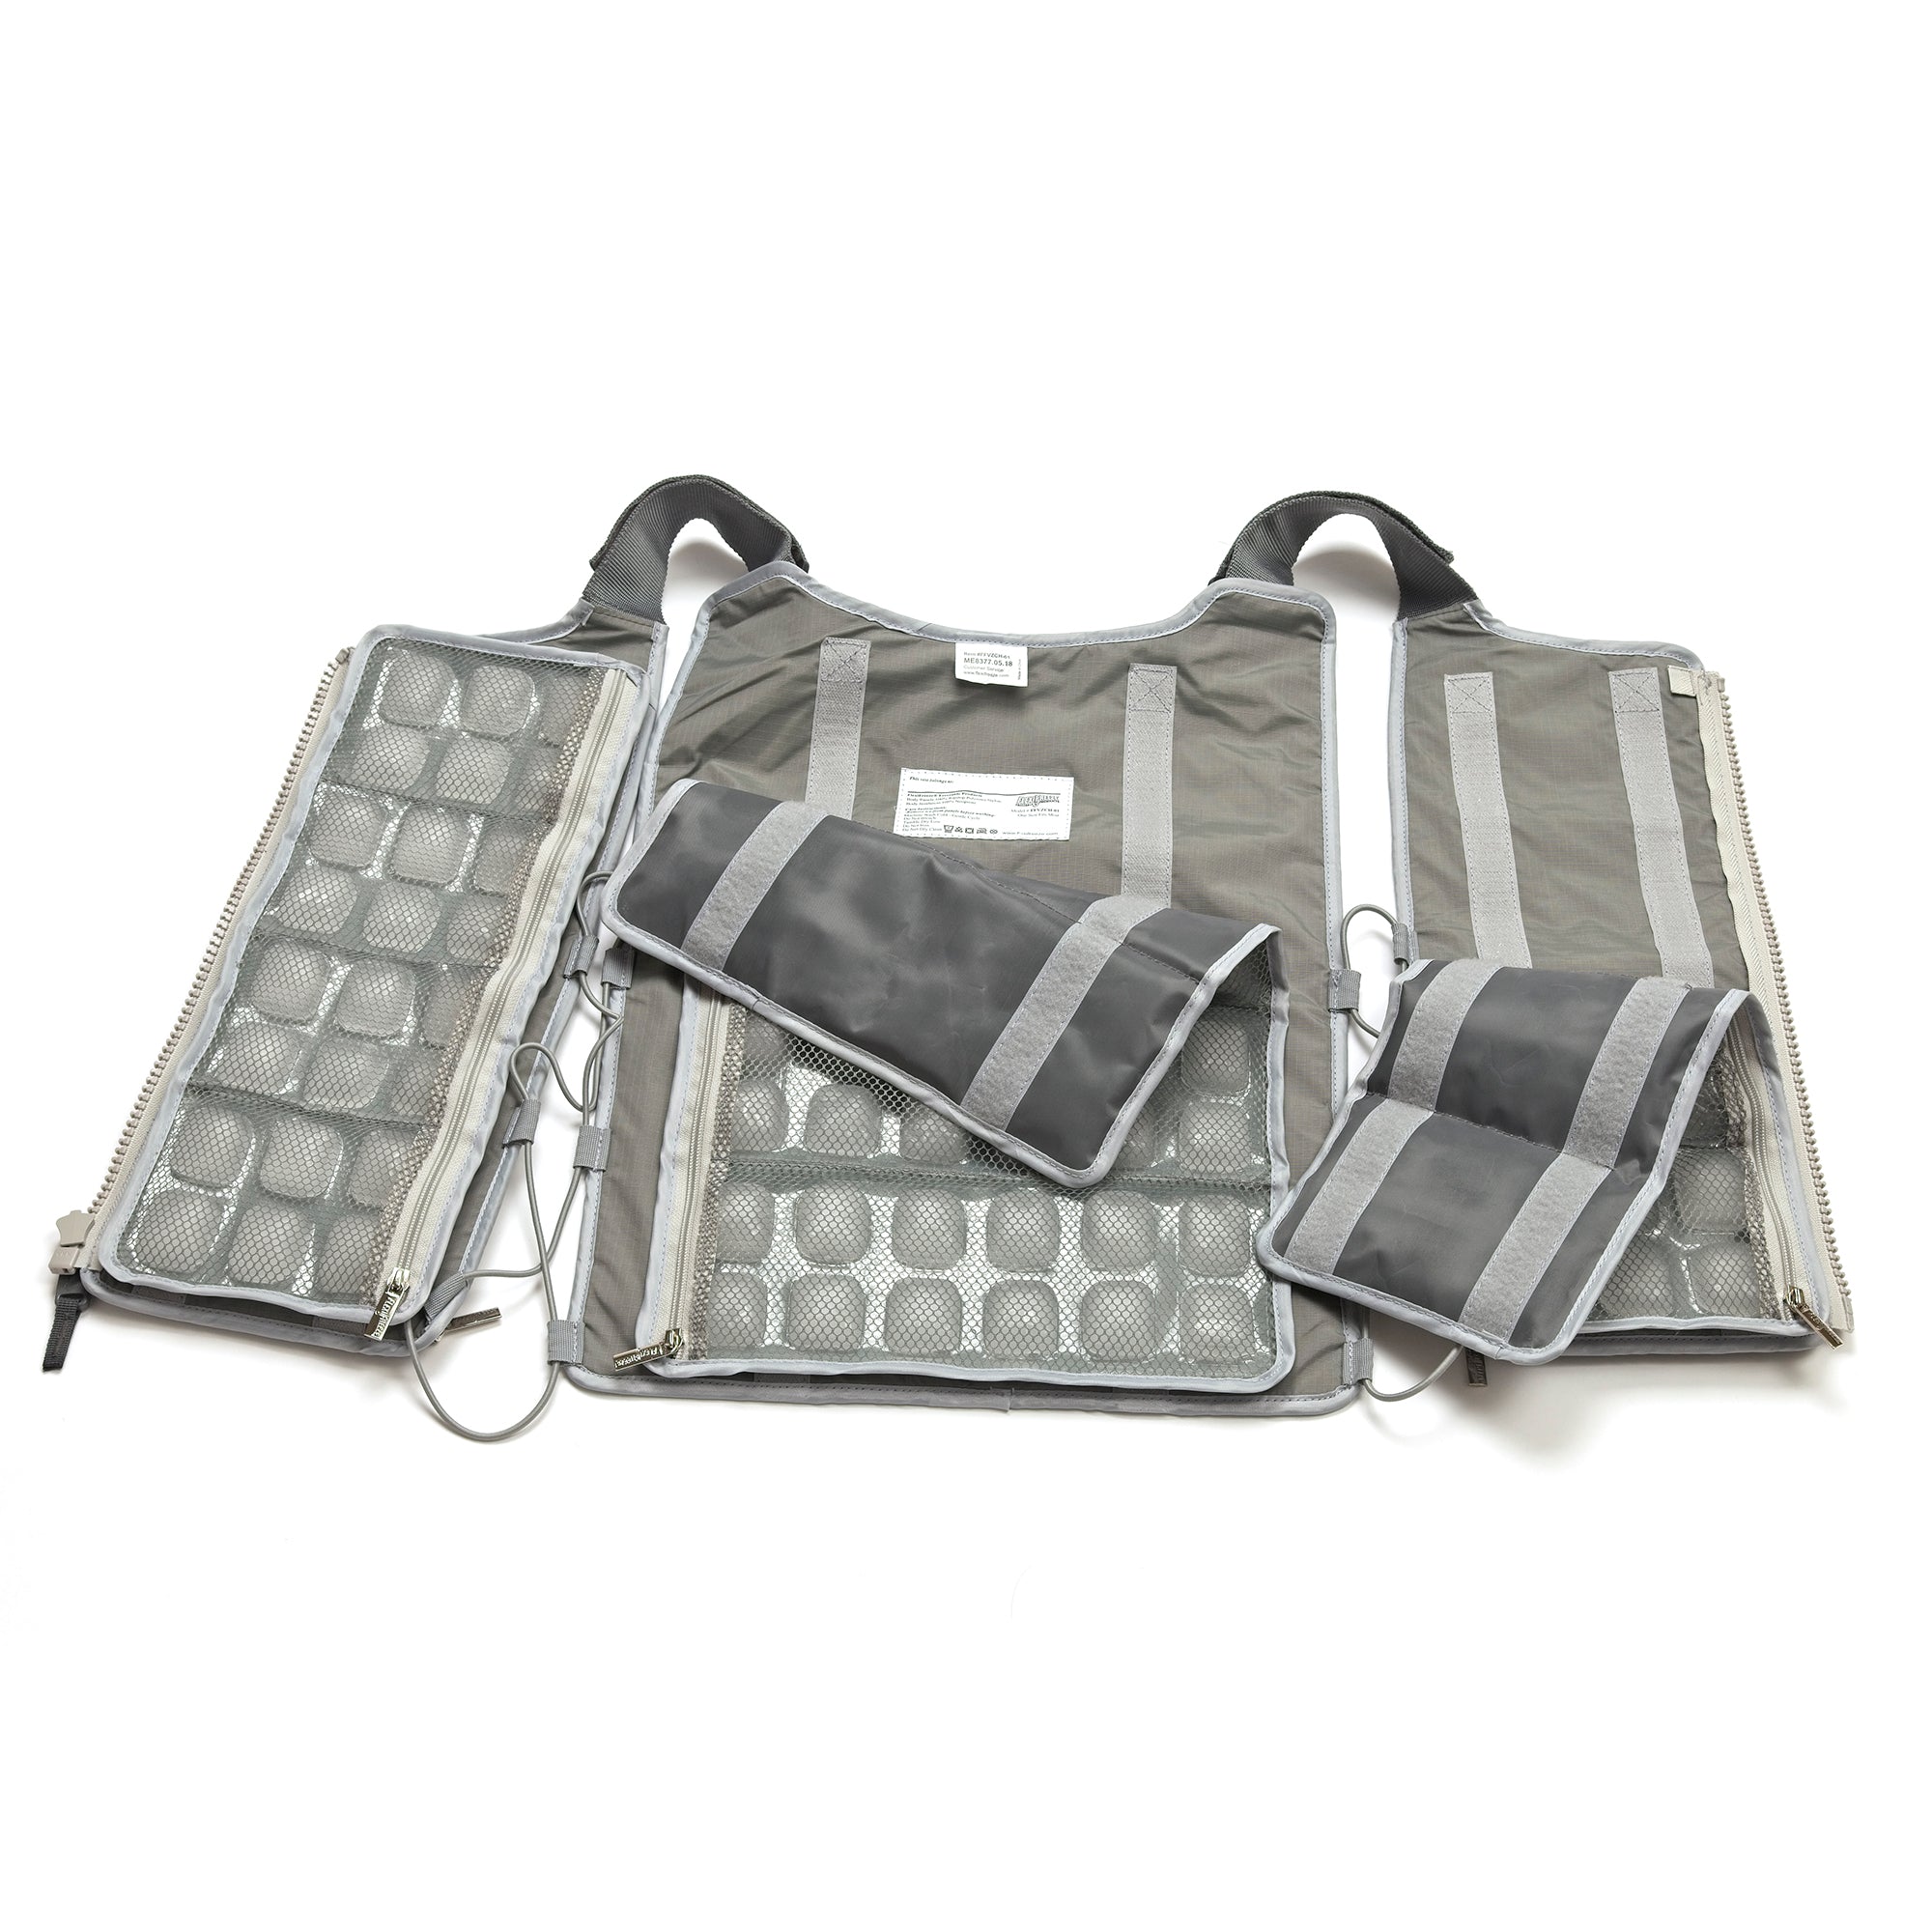 Open FlexiFreeze professional cooling vest, charcoal, with refreezable ice panels displayed